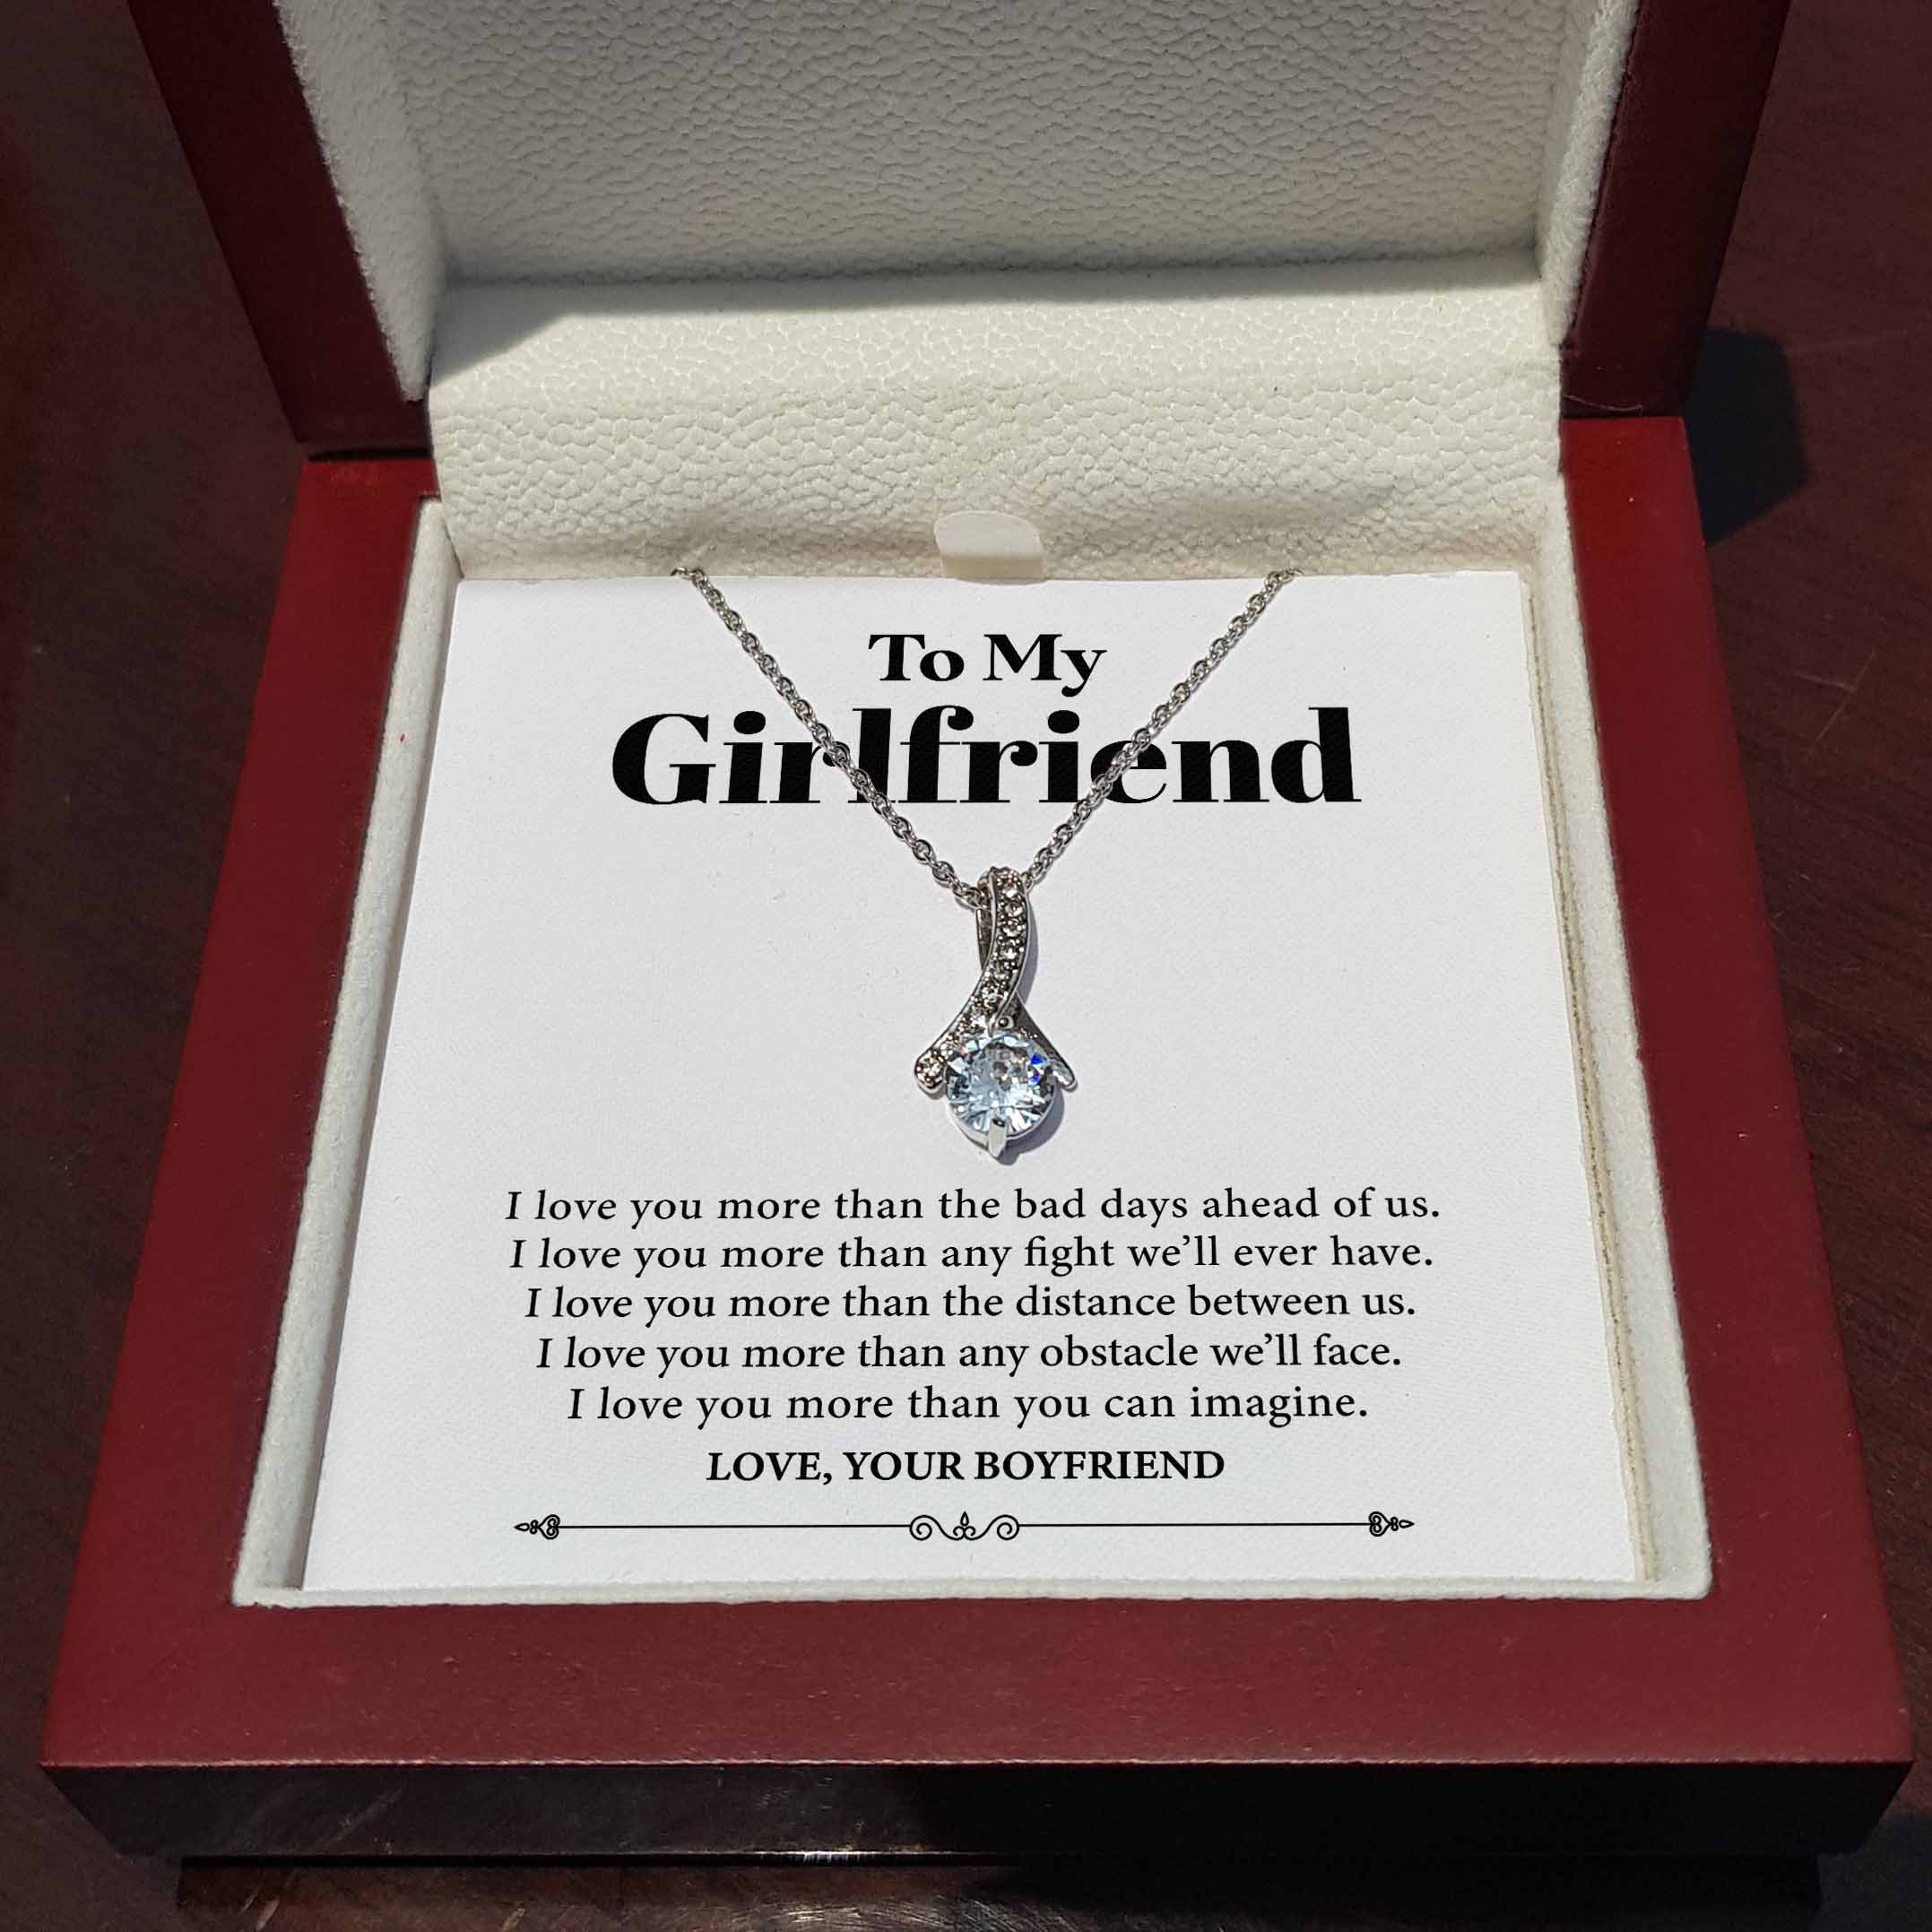 ShineOn Fulfillment Jewelry Standard Box To my Girlfriend - I Love You More - Necklace